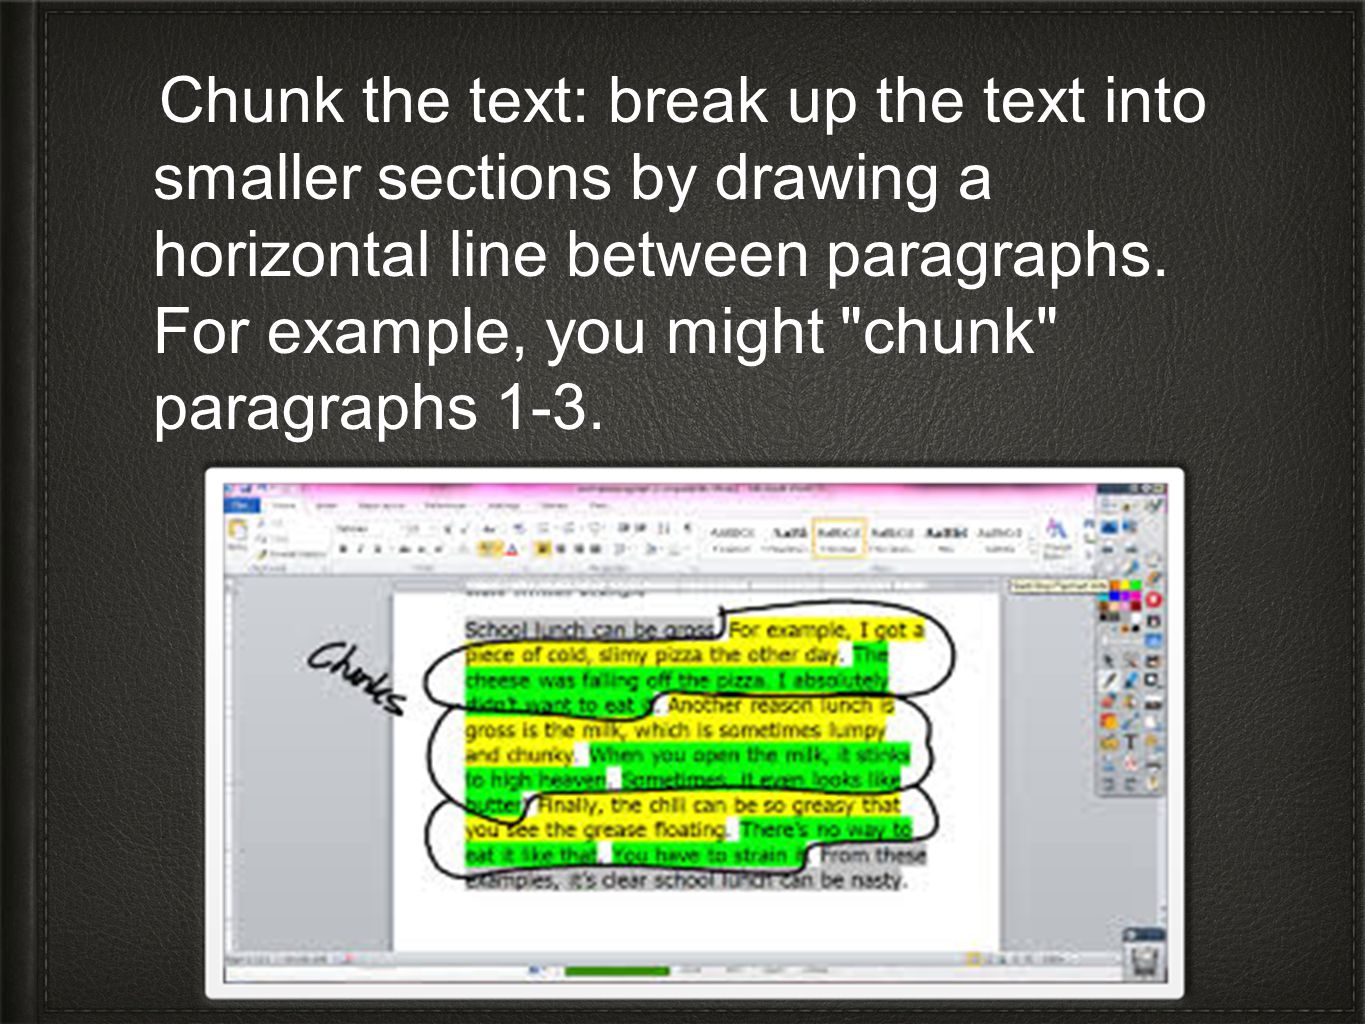 Chunk the text: break up the text into smaller sections by drawing a horizontal line between paragraphs.